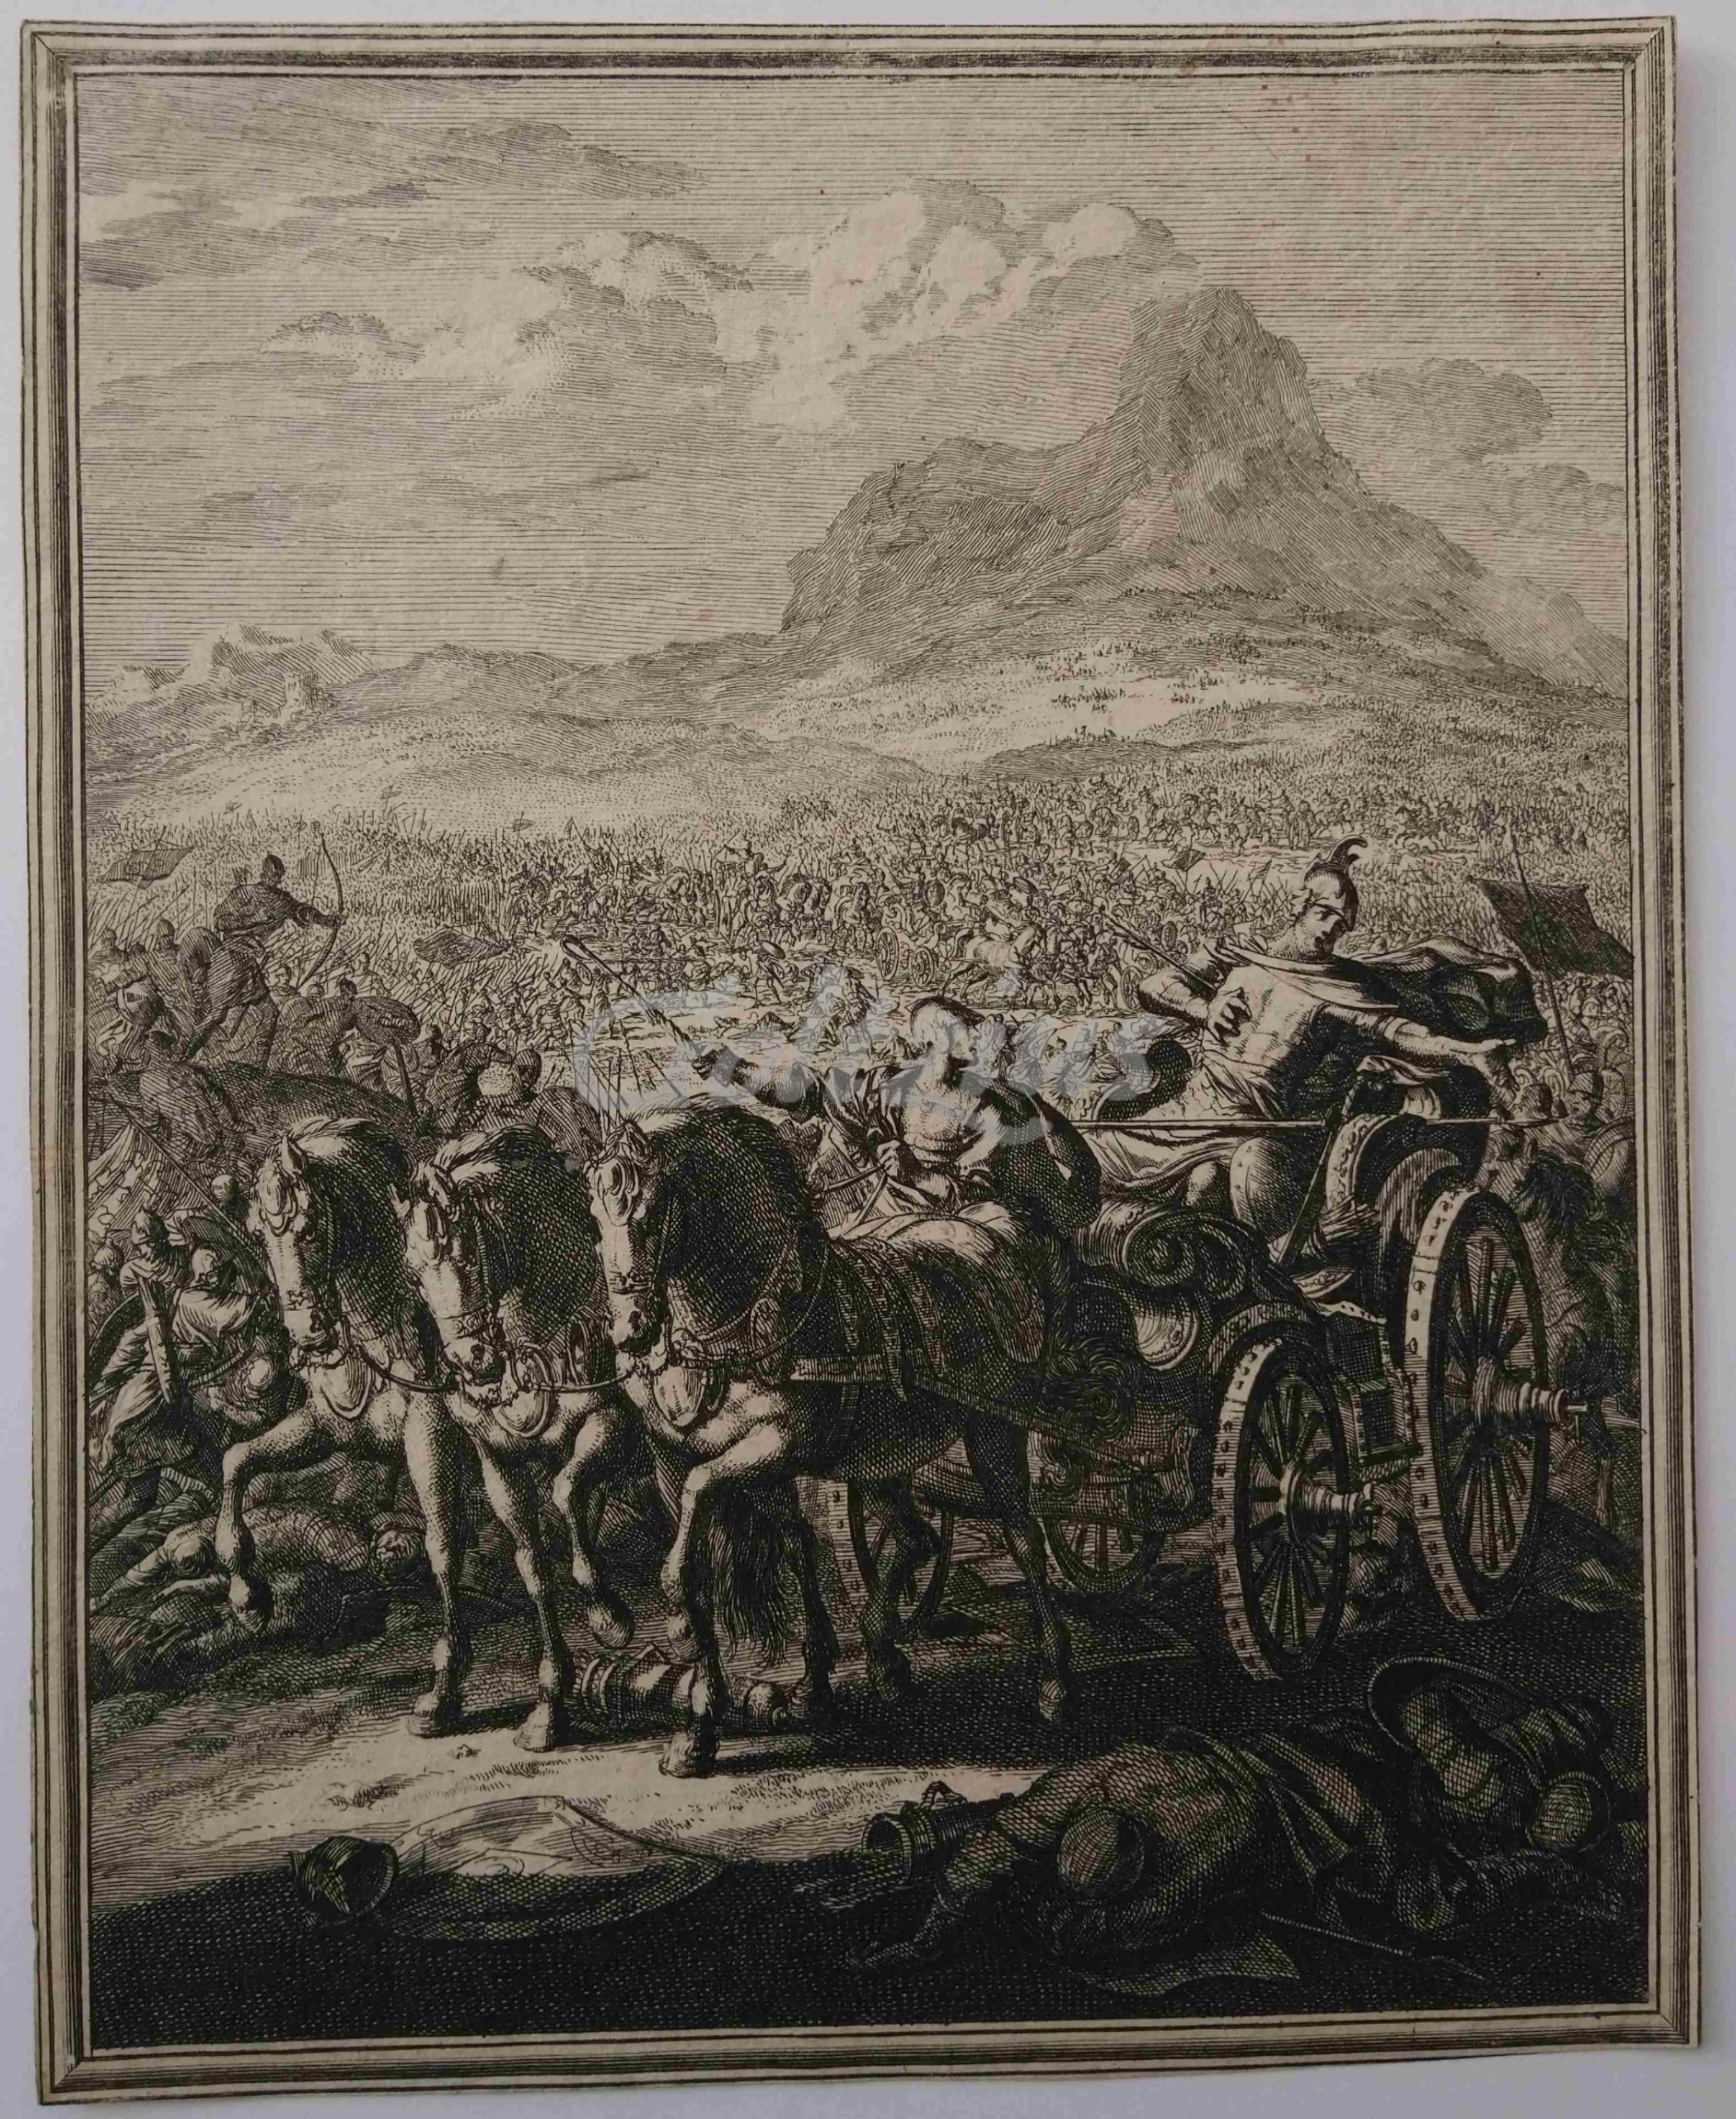 ANONYMOUS, Battle scene in front of a large mountain